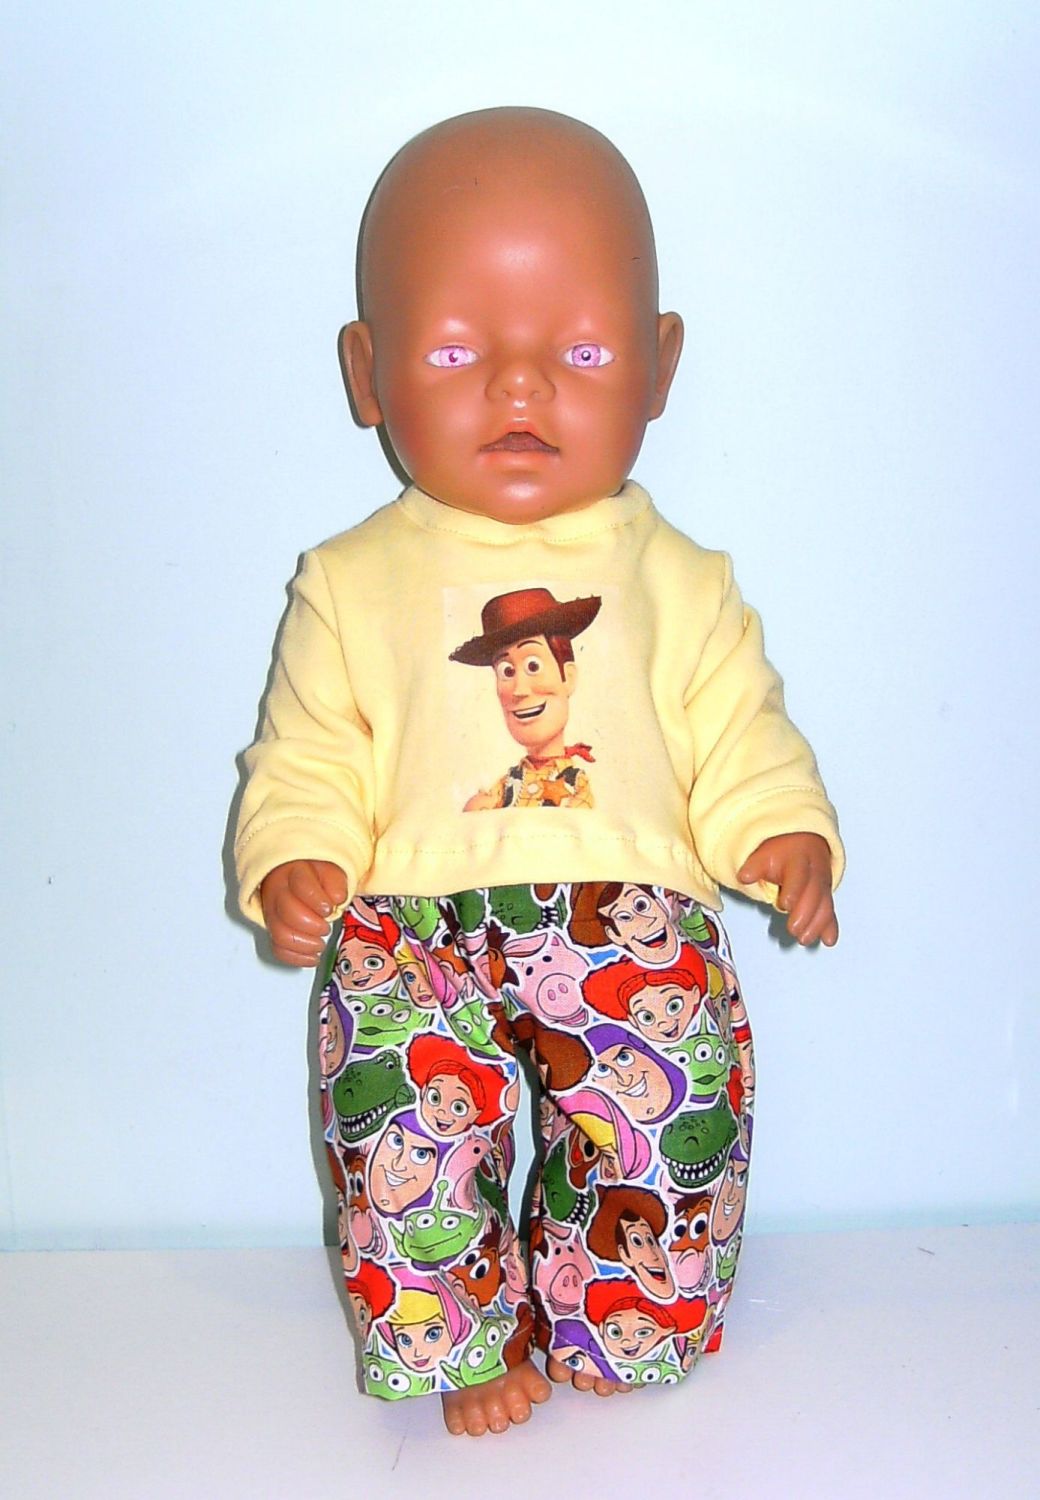 Doll's pajamas to fit Baby Born Boy doll